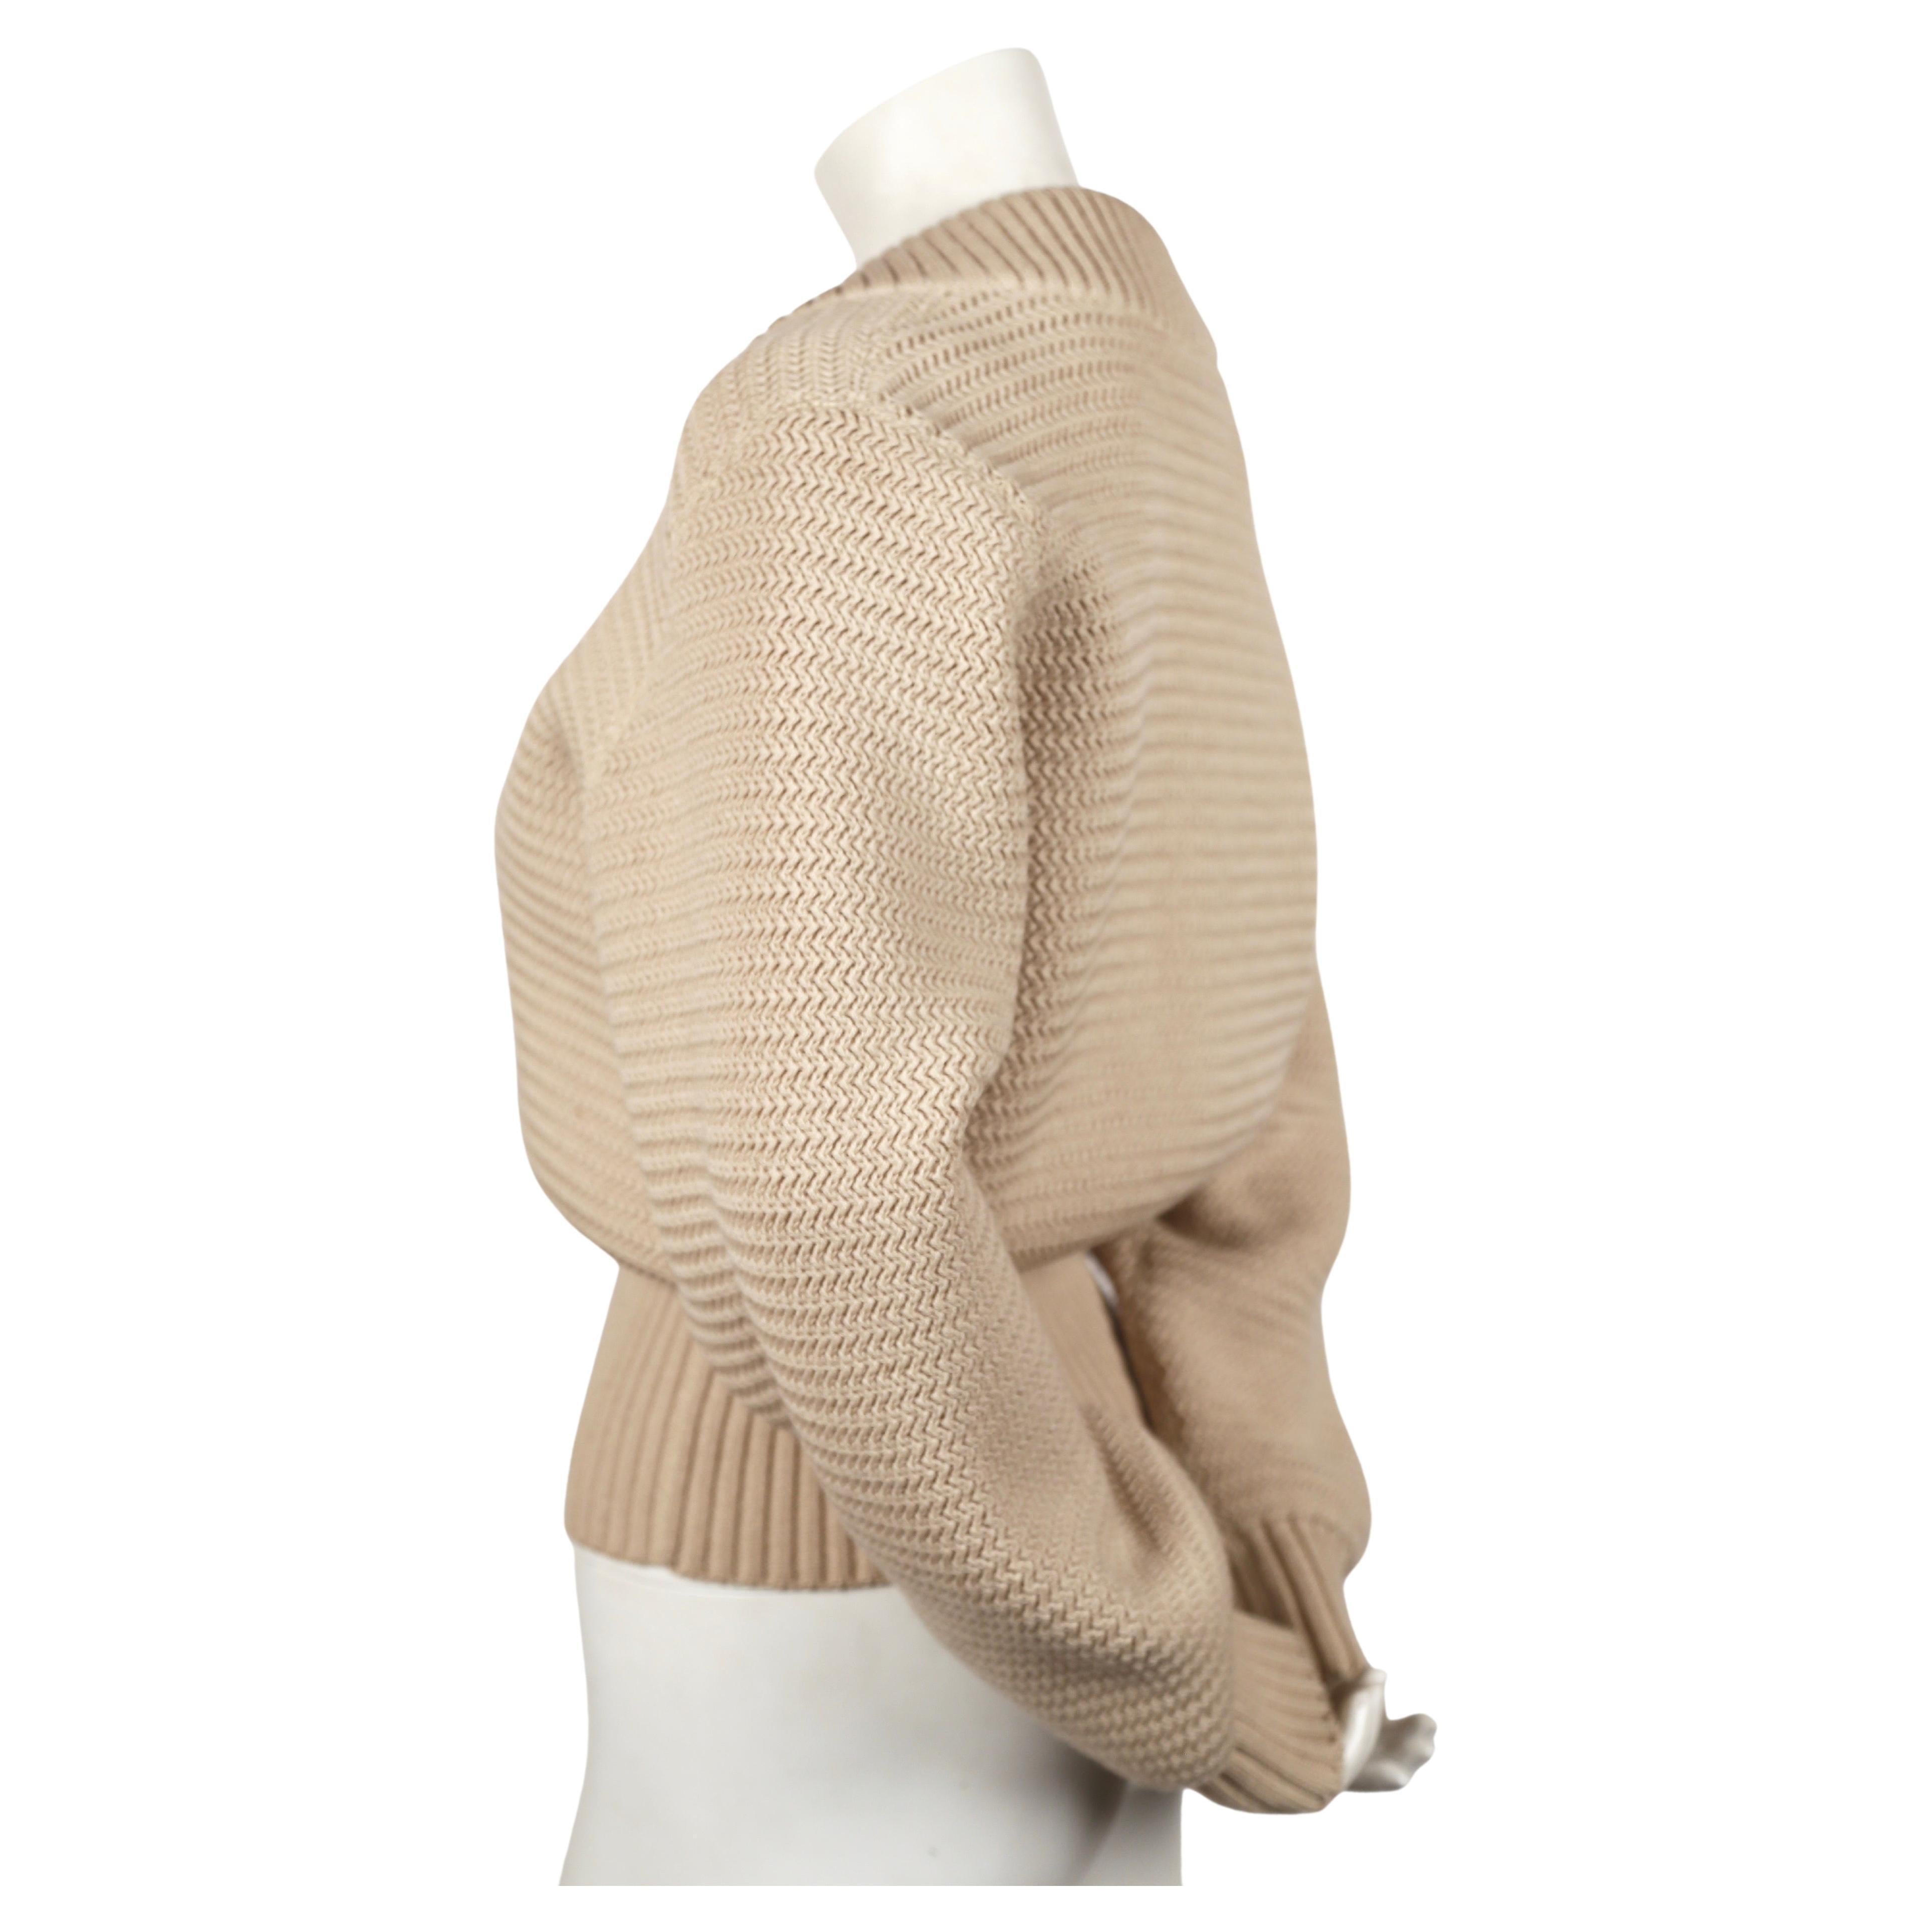 1986 AZZEDINE ALAIA heavy knit RUNWAY cardigan sweater coat with zippers In Good Condition For Sale In San Fransisco, CA